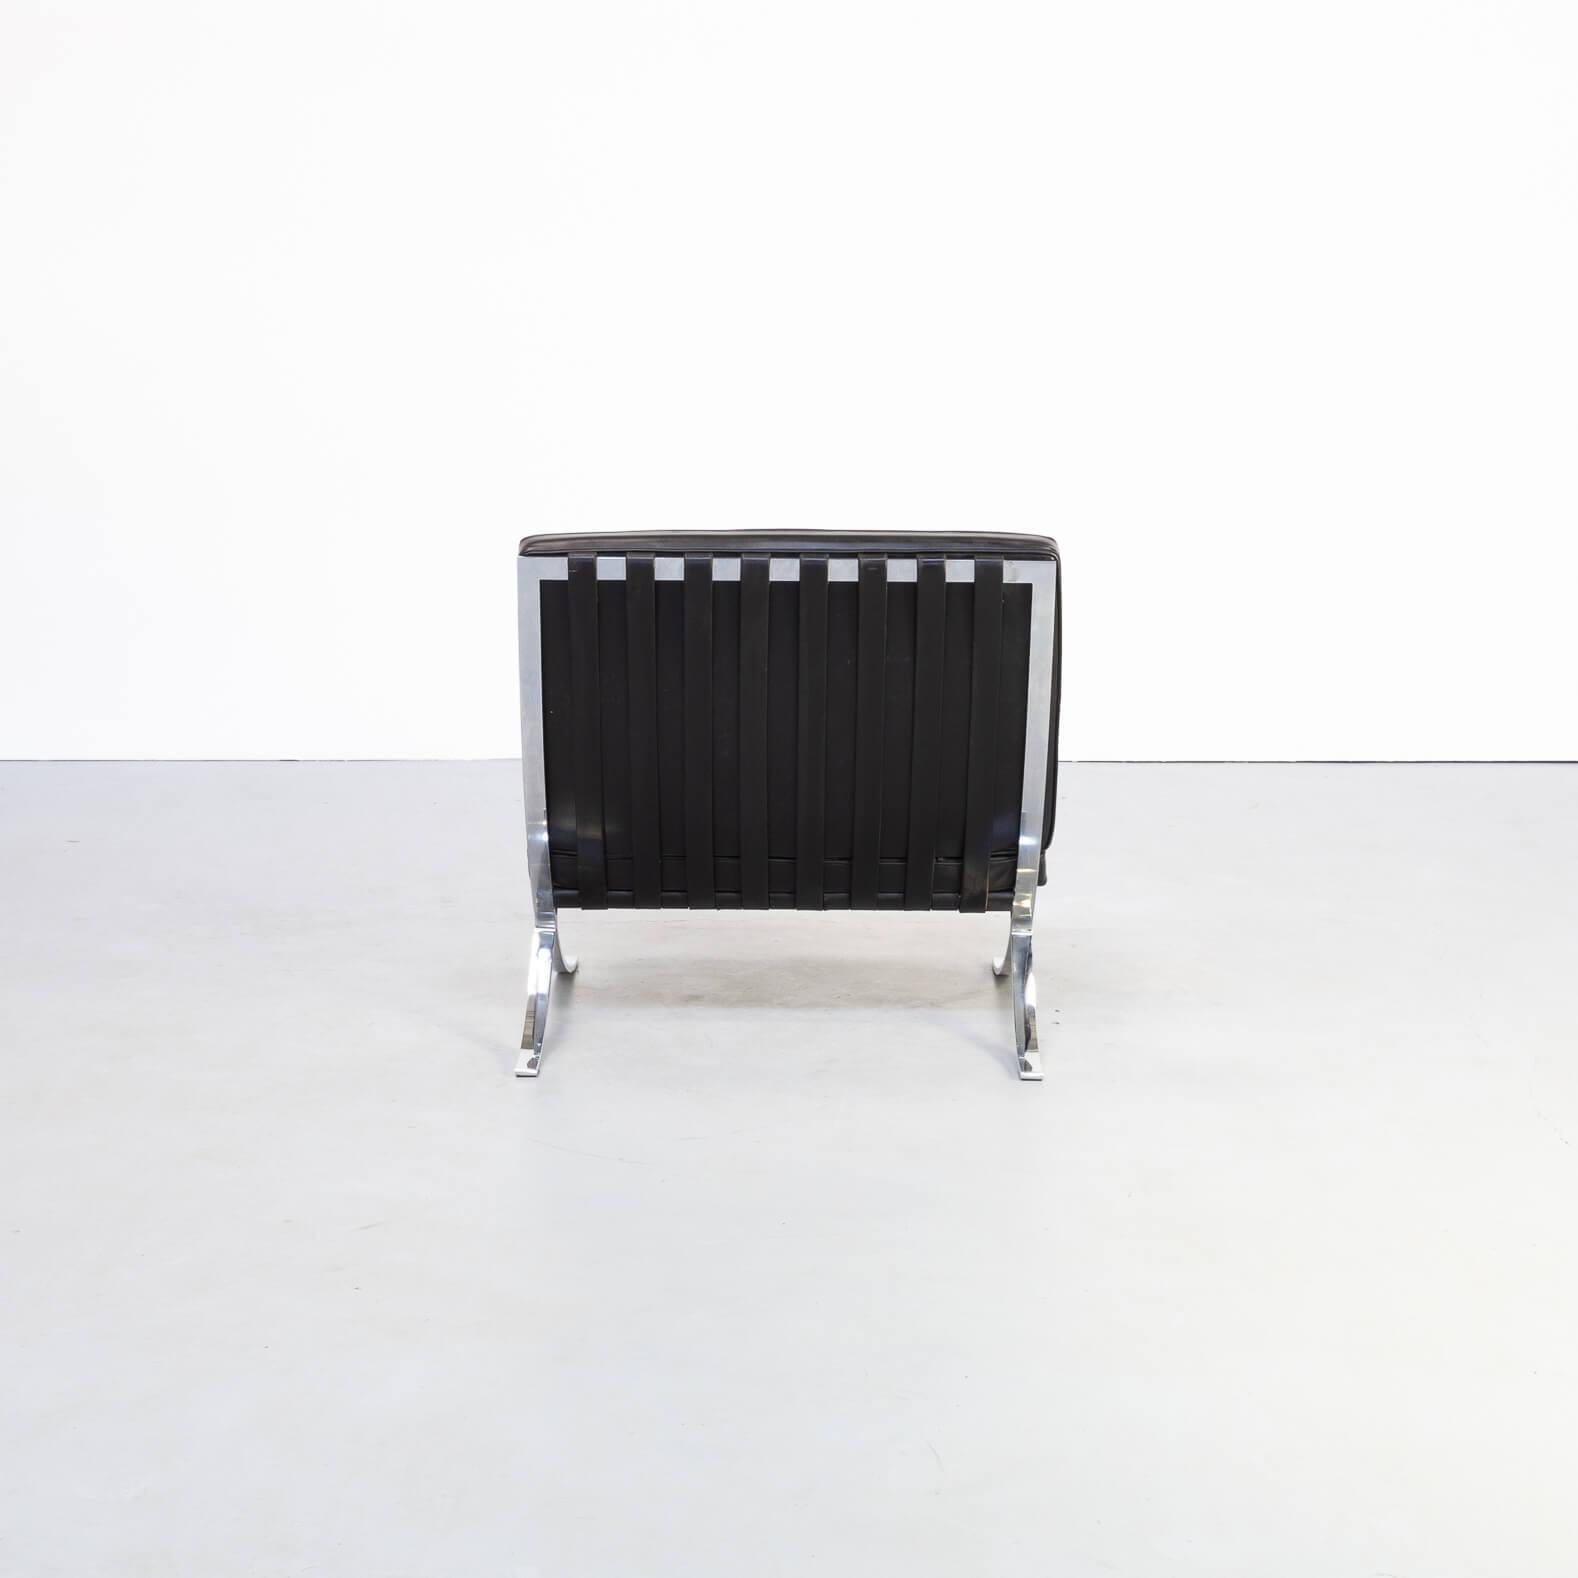 German 1930s Mies van der Rohe ‘Barcelona’ Chair for Knoll For Sale